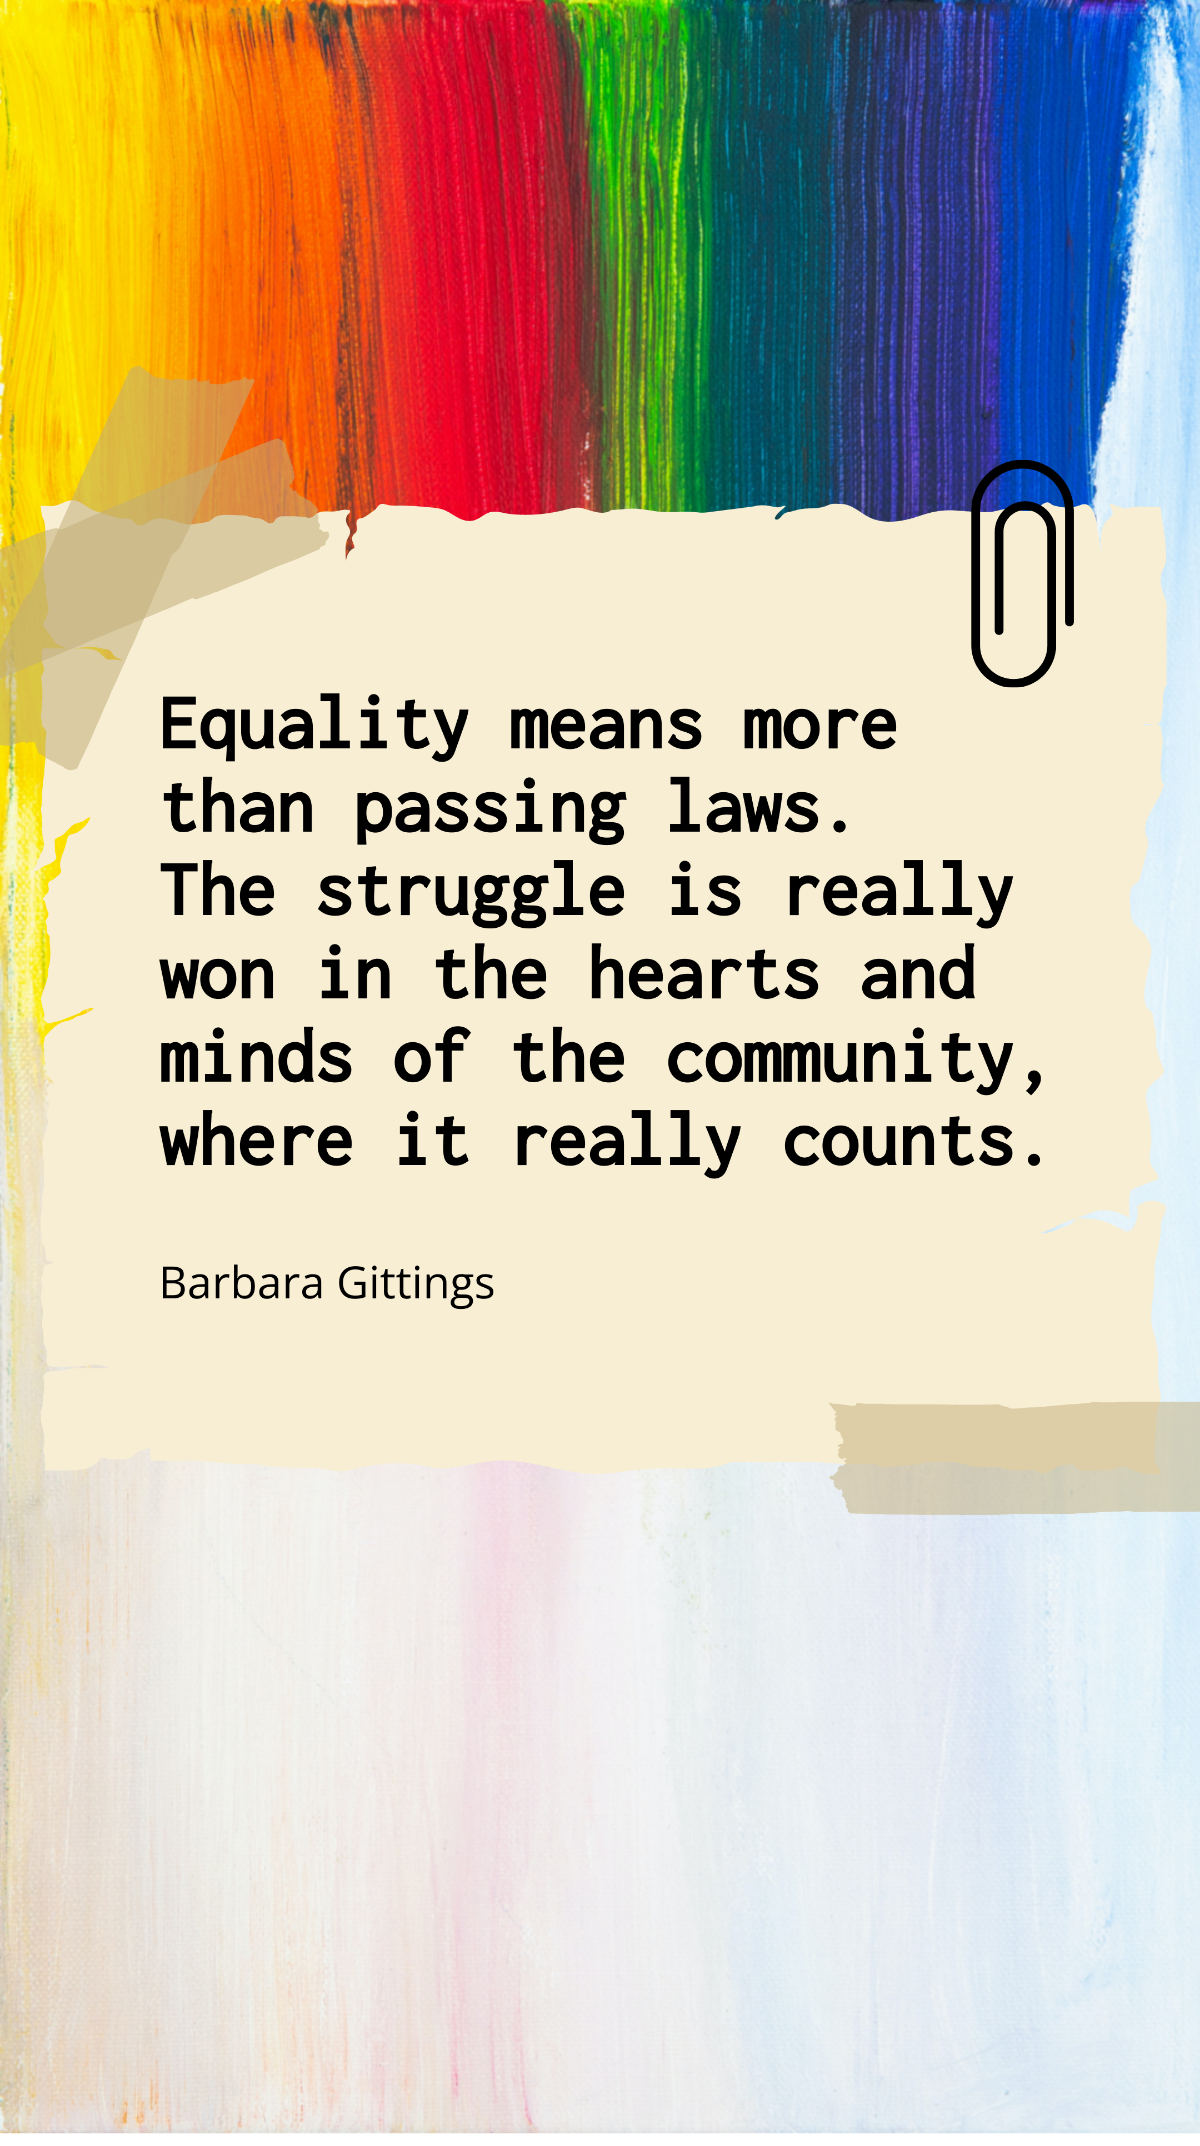 Barbara Gittings - Equality means more than passing laws. The struggle is really won in the hearts and minds of the community, where it really counts. Template